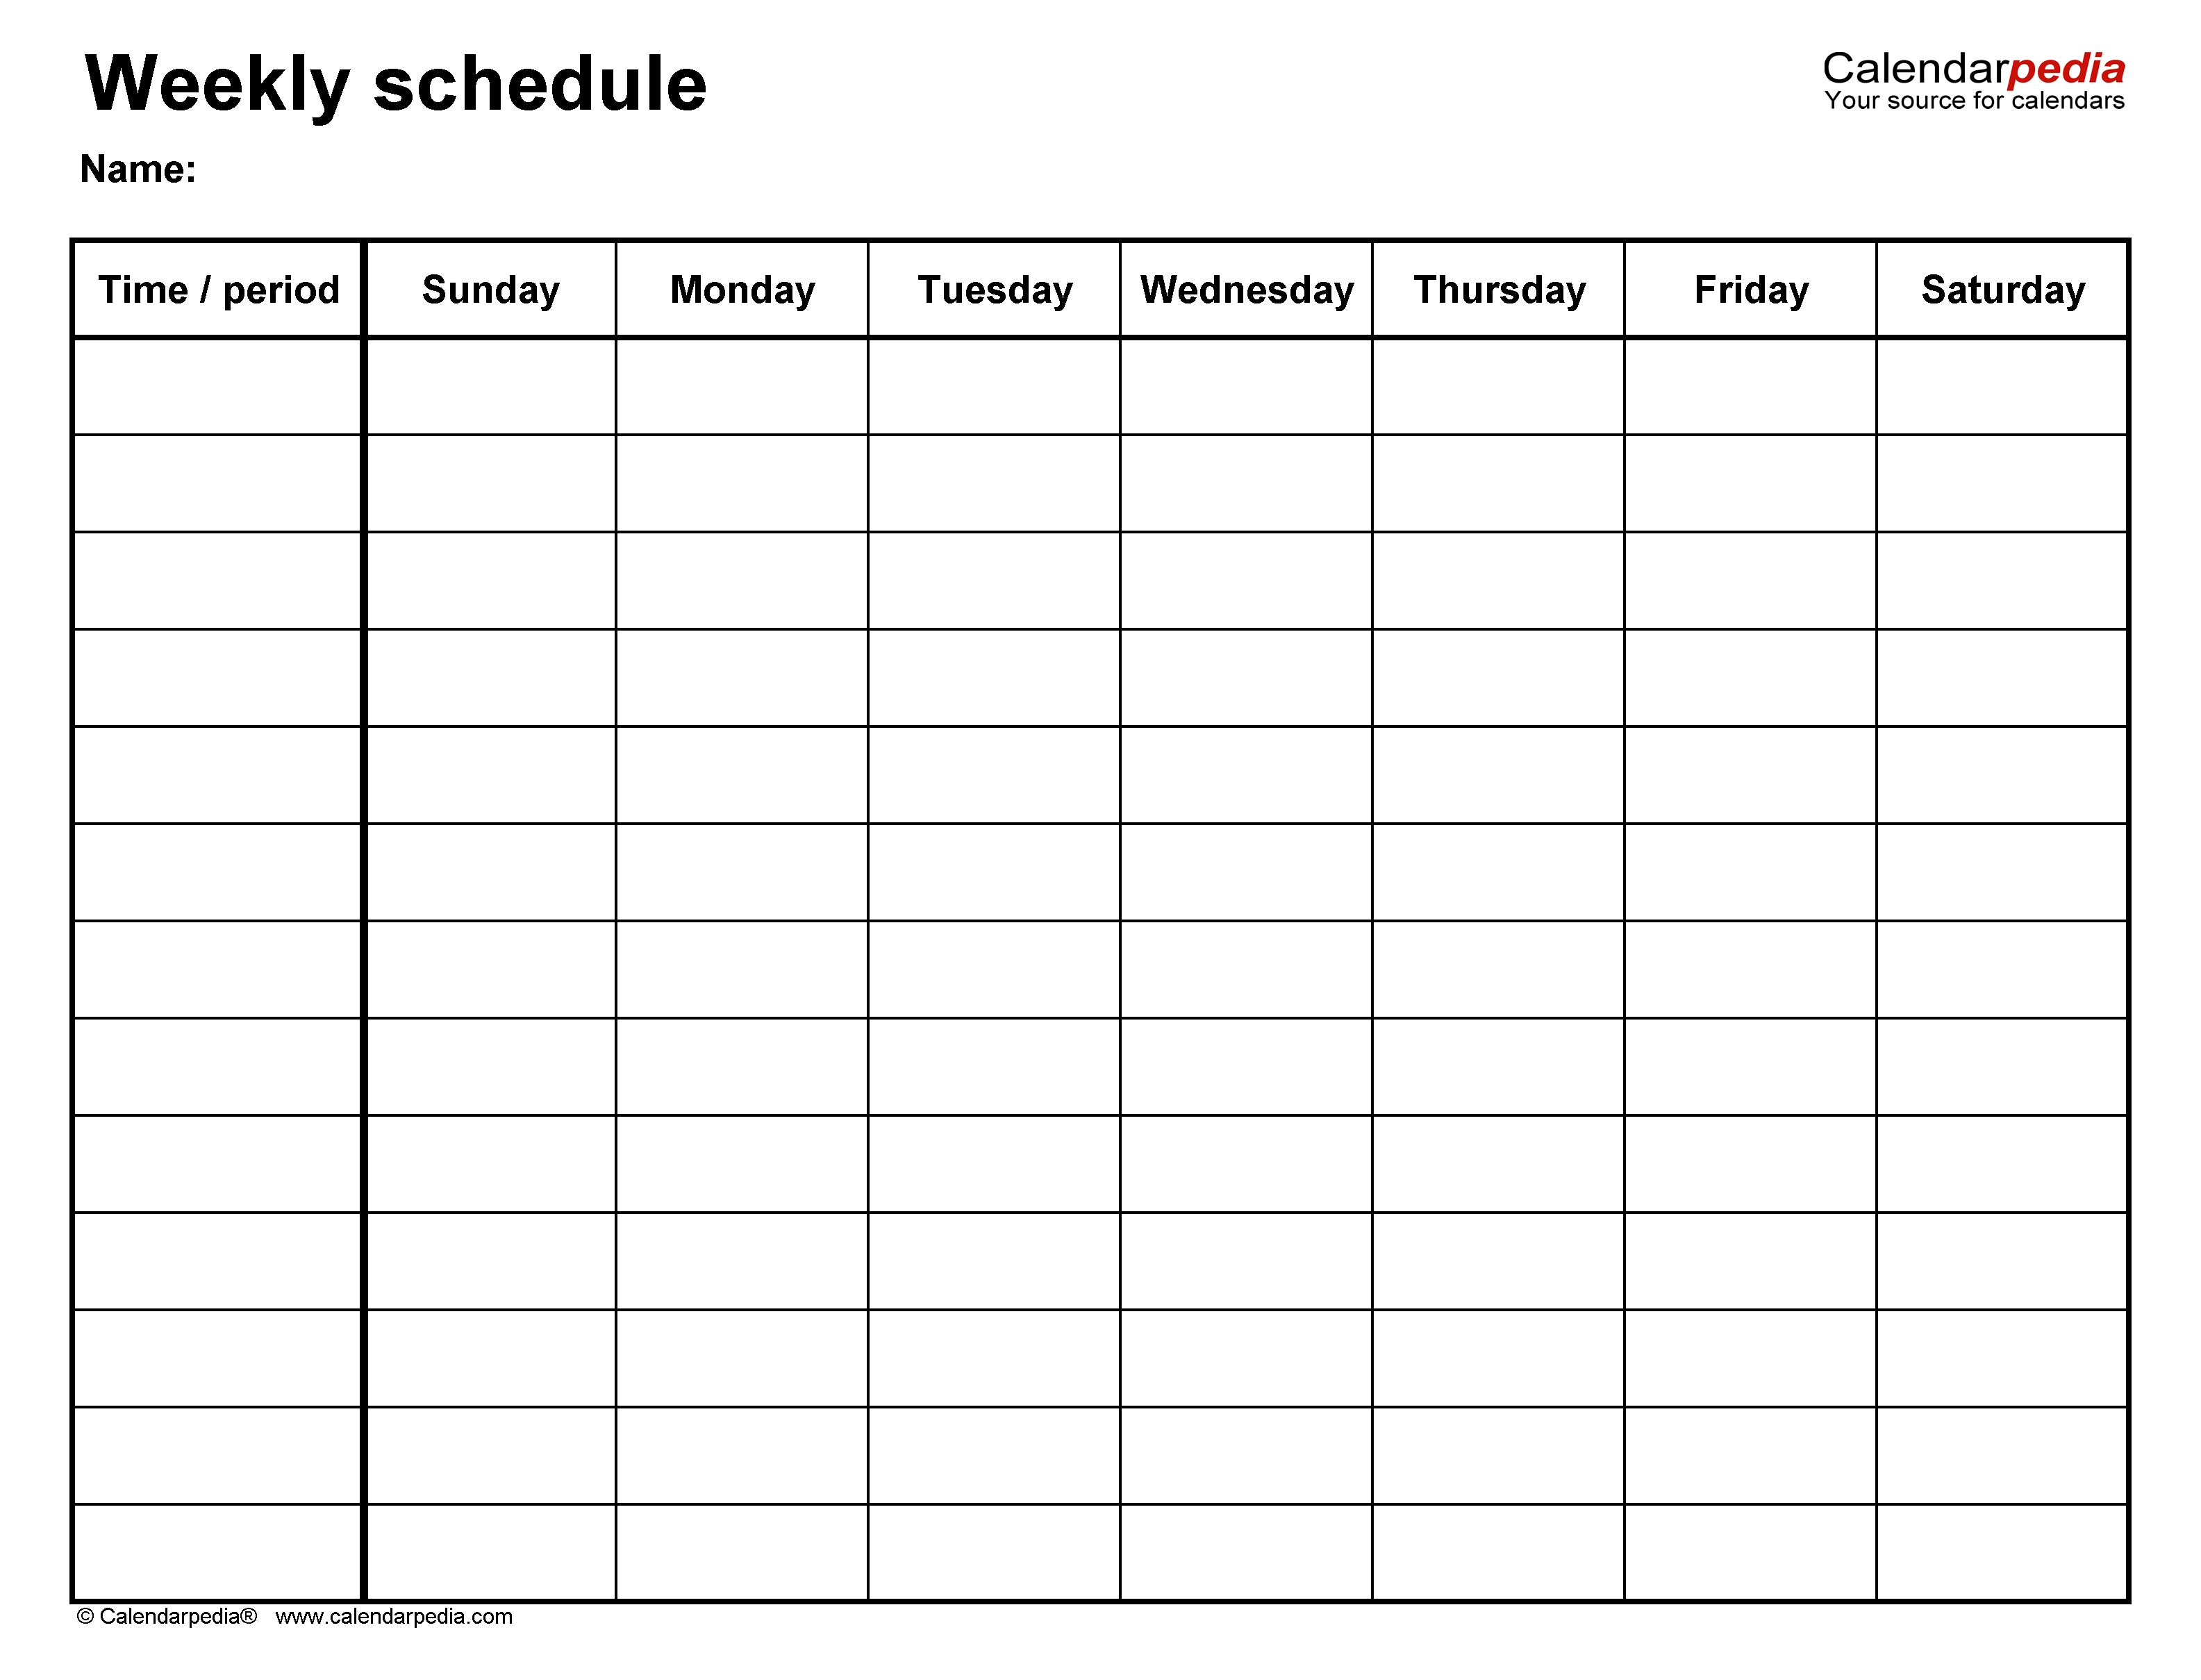 Free Weekly Schedule Templates For Word - 18 Templates 7 Day A Week Calendar Template